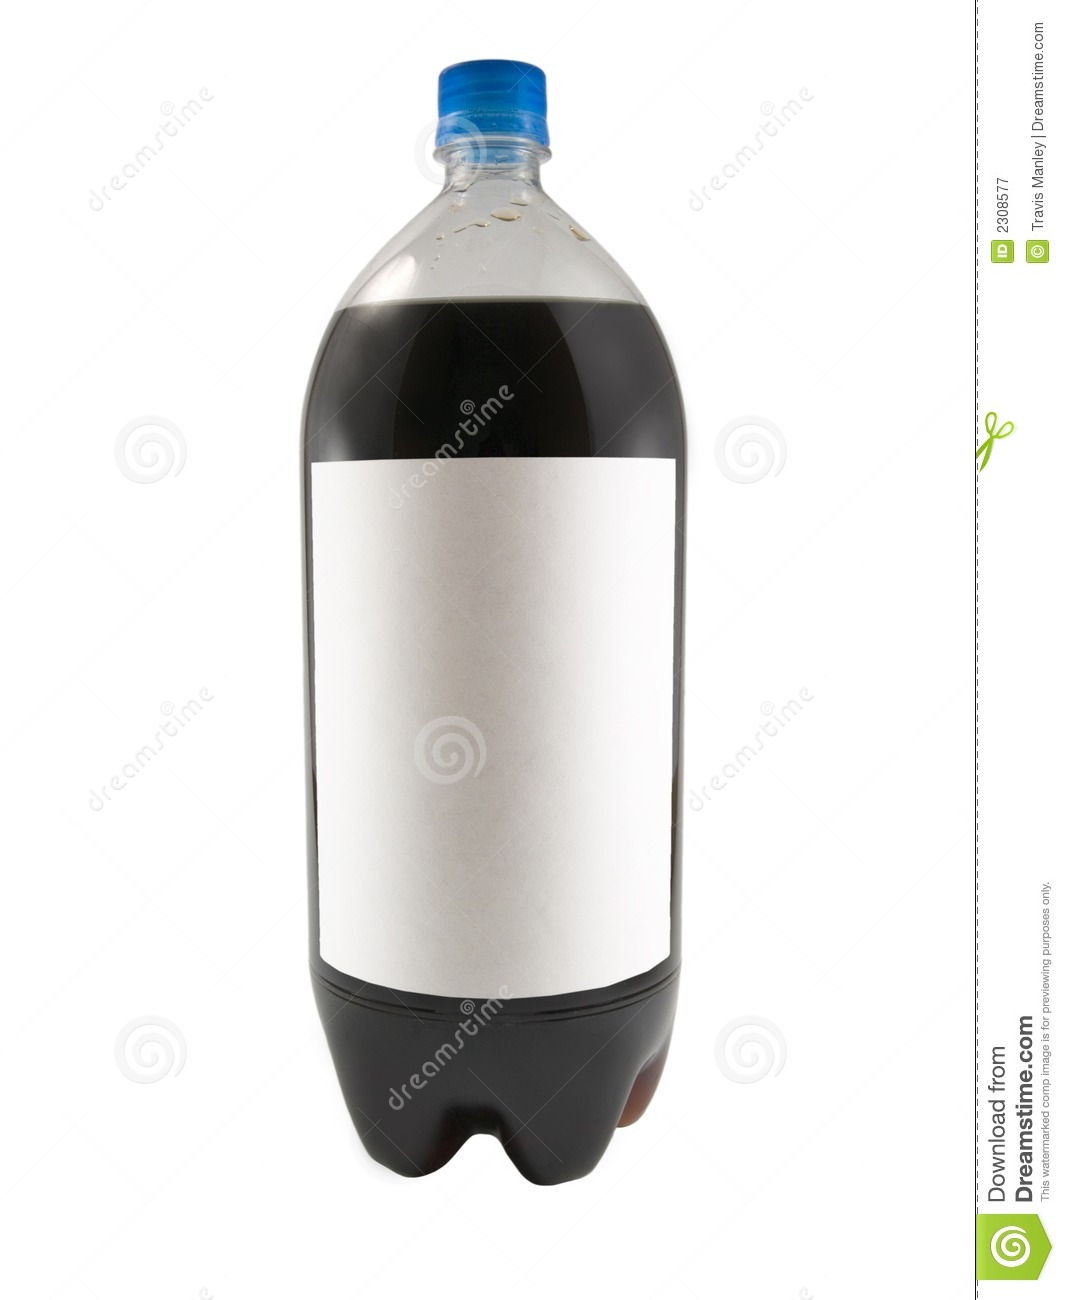 Close Up On A Soda Bottle Isolated On A White Background With A